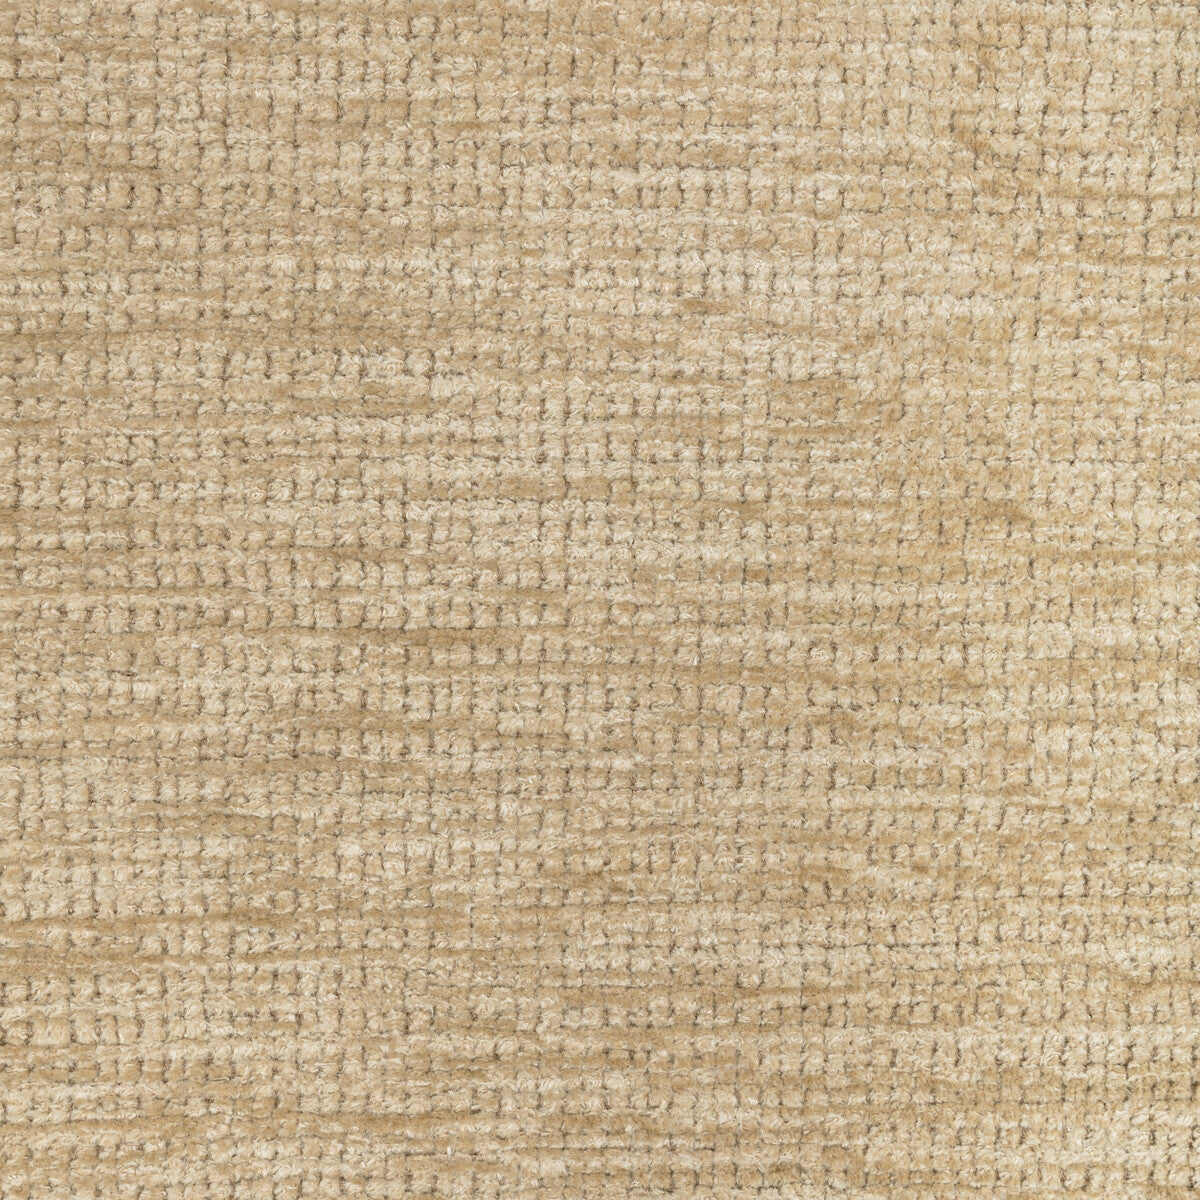 Lemenc Texture fabric in beige color - pattern 8022124.16.0 - by Brunschwig &amp; Fils in the Chambery Textures III collection